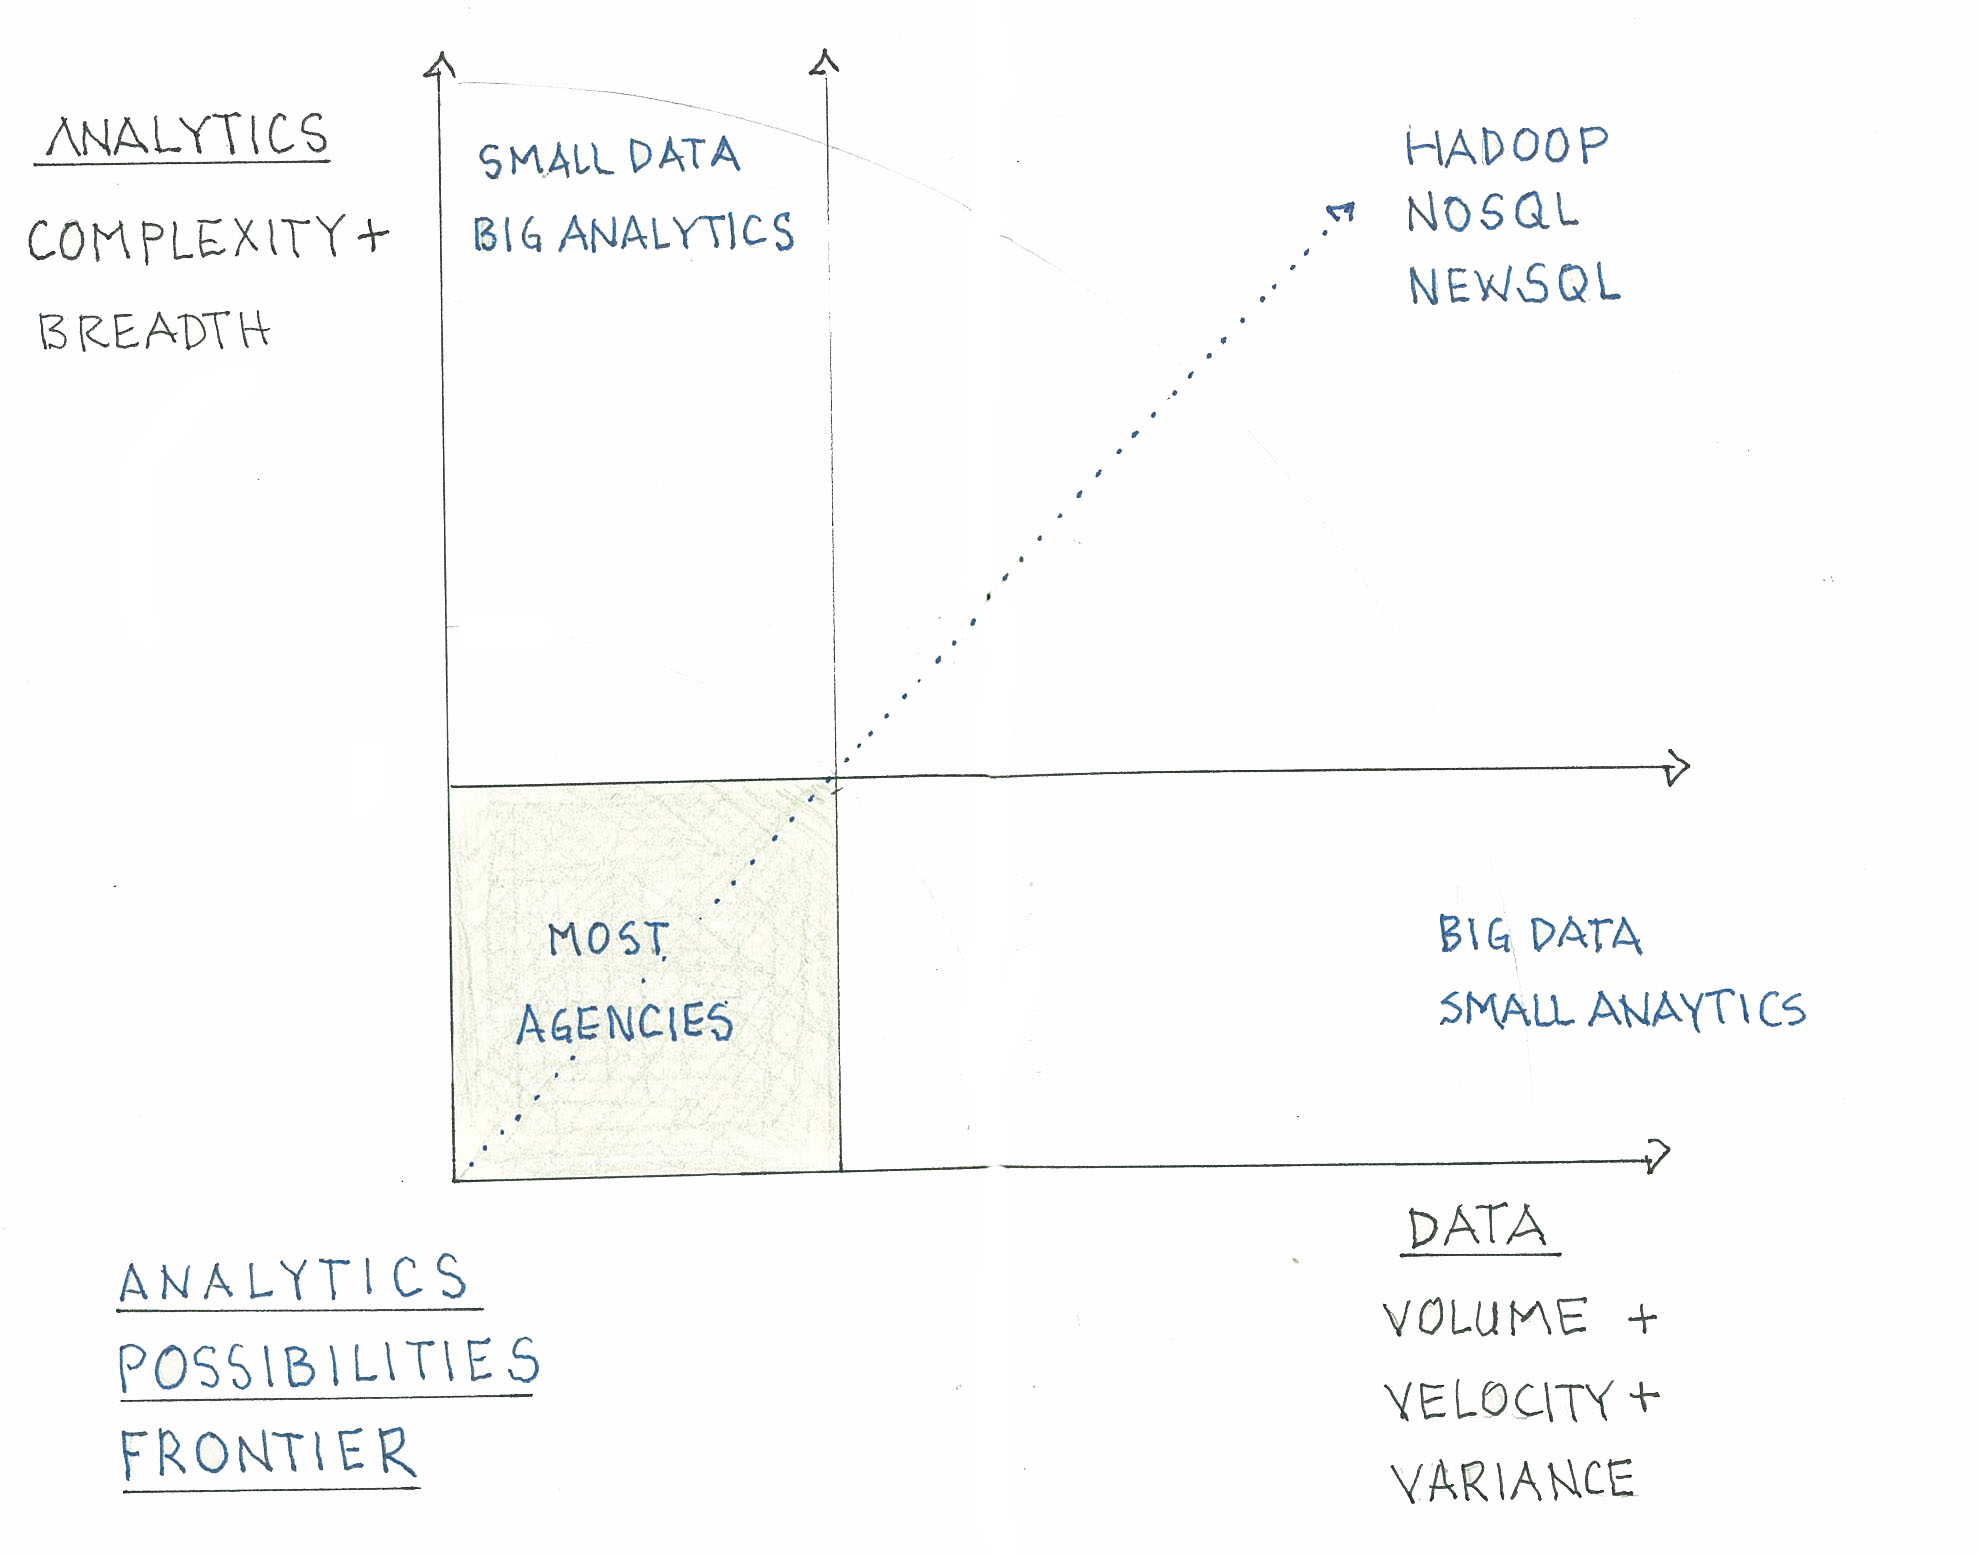 Notebook Thoughts – The Analytics Possibilities Frontier